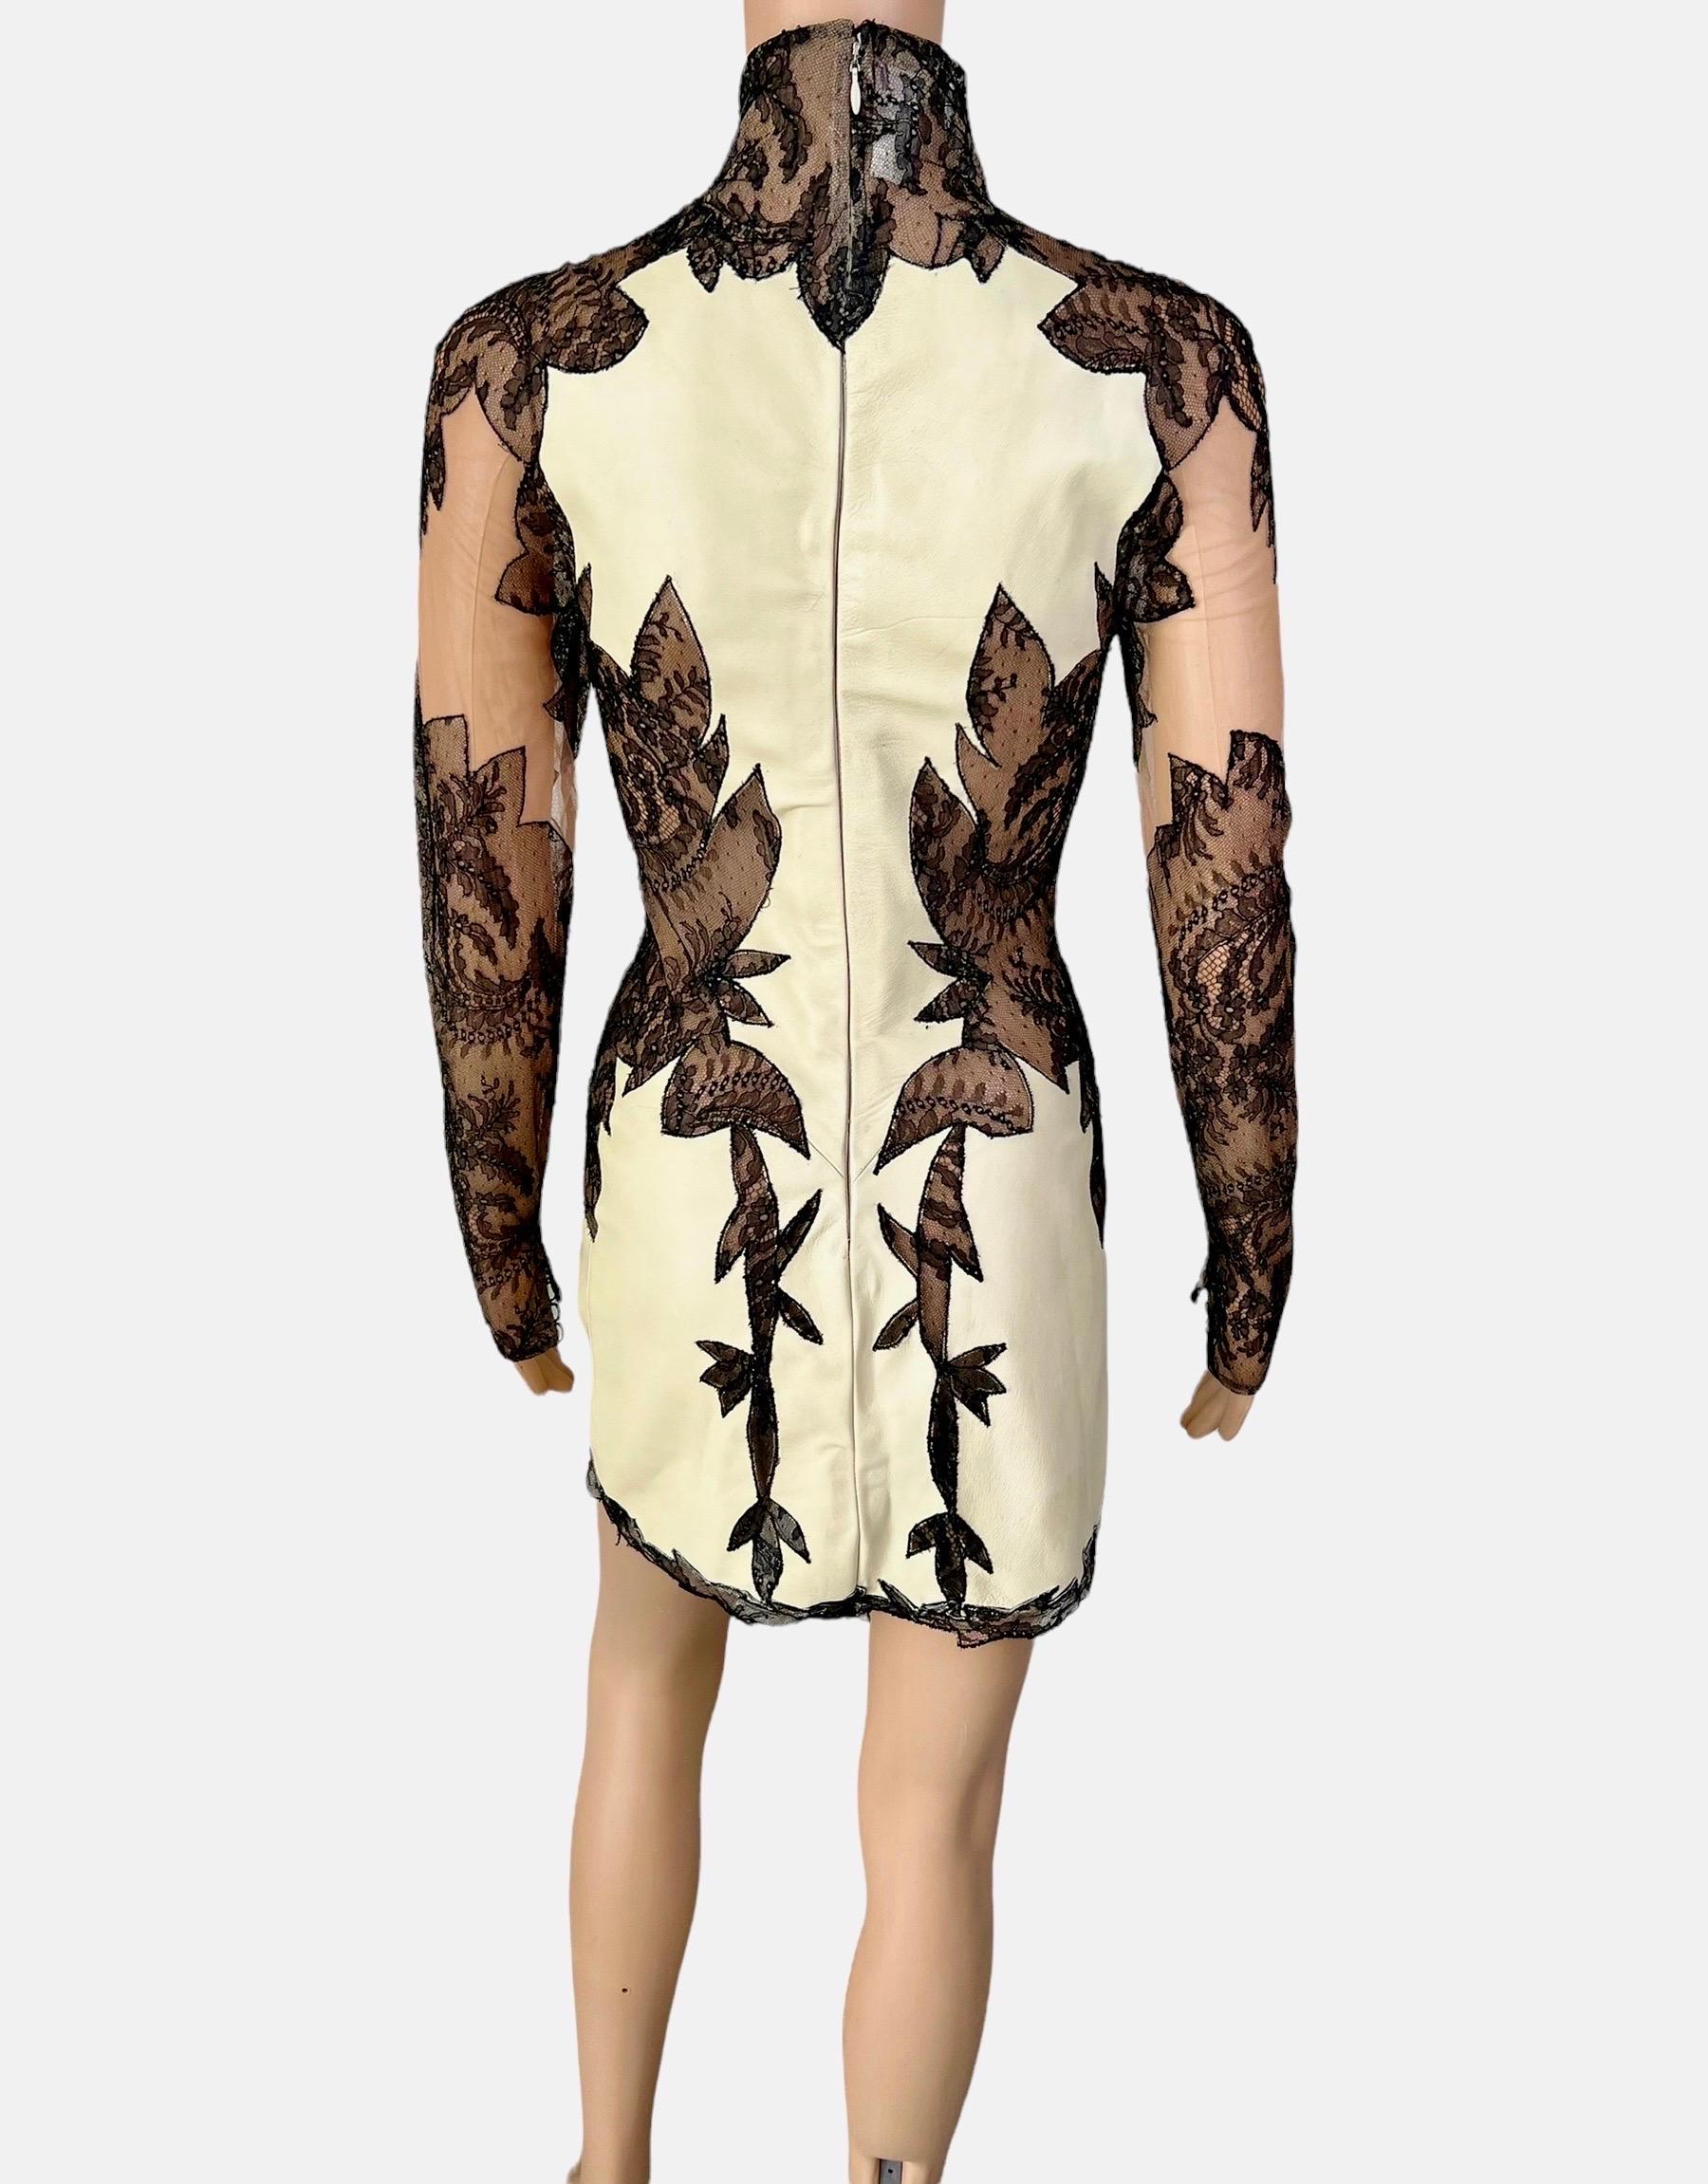 Gianni Versace S/S 2002 Plunging Leather and Sheer Lace Panels Cutout Mini Dress In Good Condition For Sale In Naples, FL